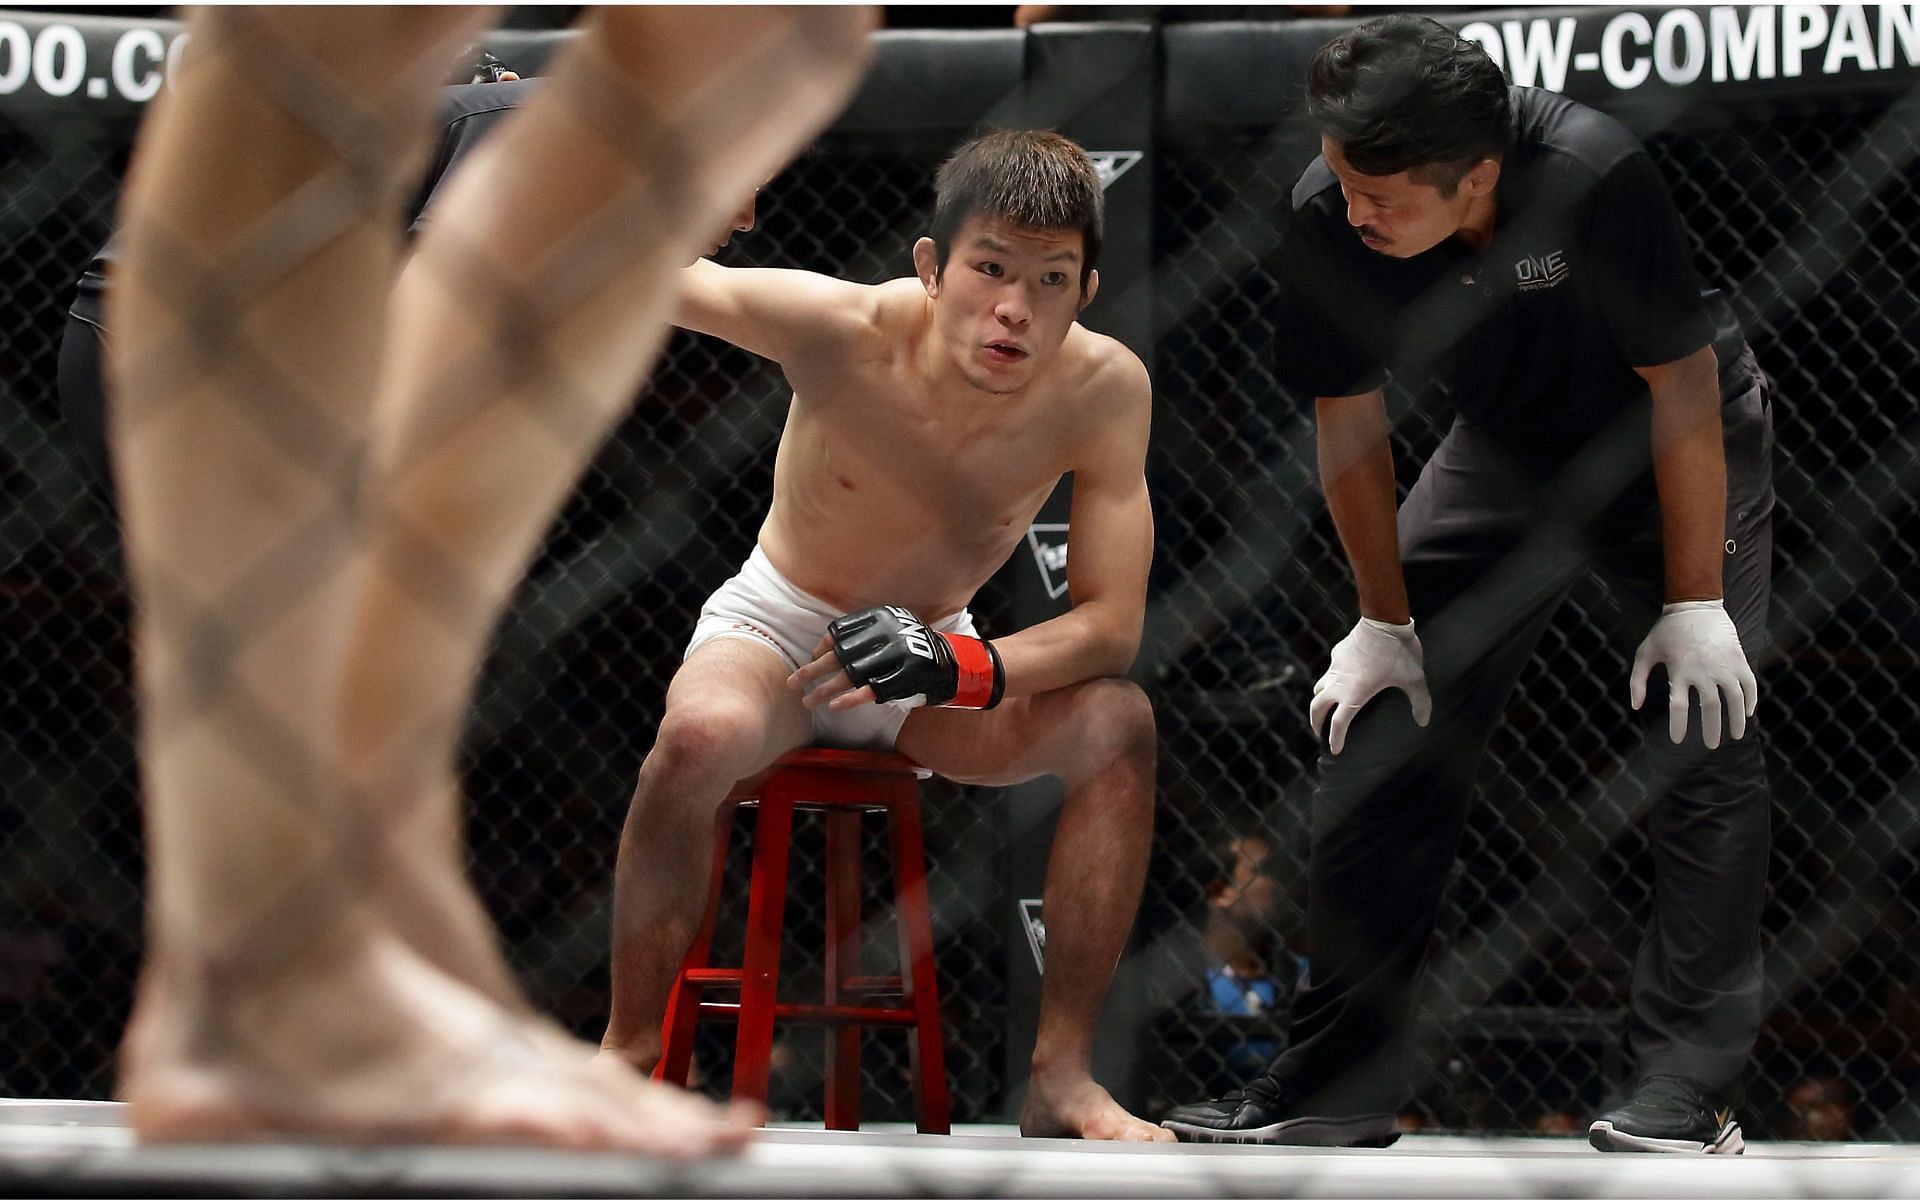 &quot;The Grand Master of Flying Submissions&quot; Shinya Aoki [Photo credit: Getty Images]